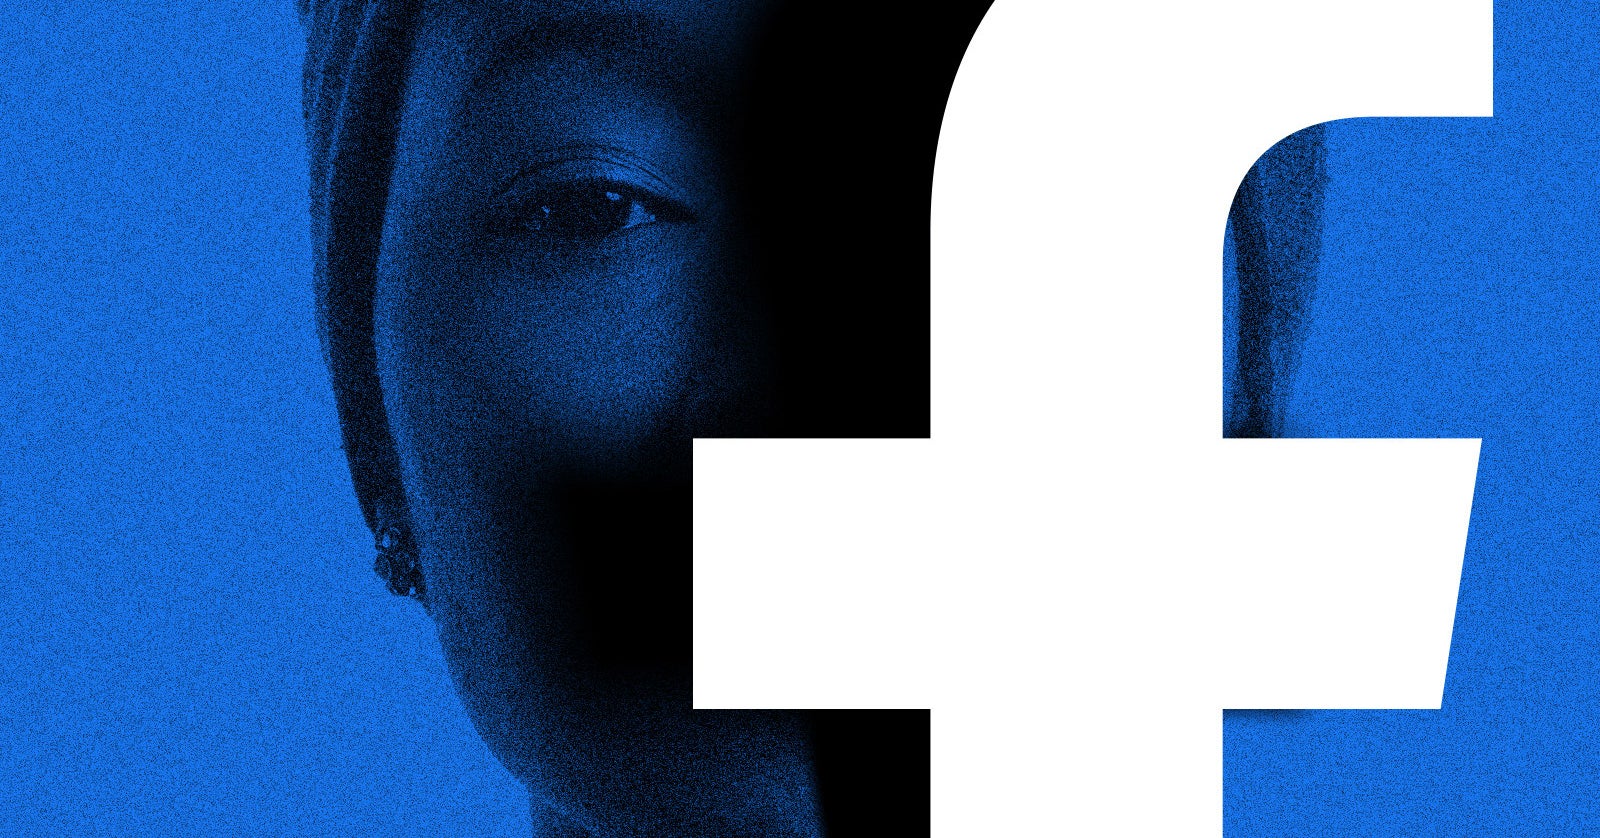 Facebook Is Trying To Build A Race Neutral Platform Black Activists Want It To Be An Anti Racist One Wilson S Media - once deimis played roblox gay roblox porn meme generator